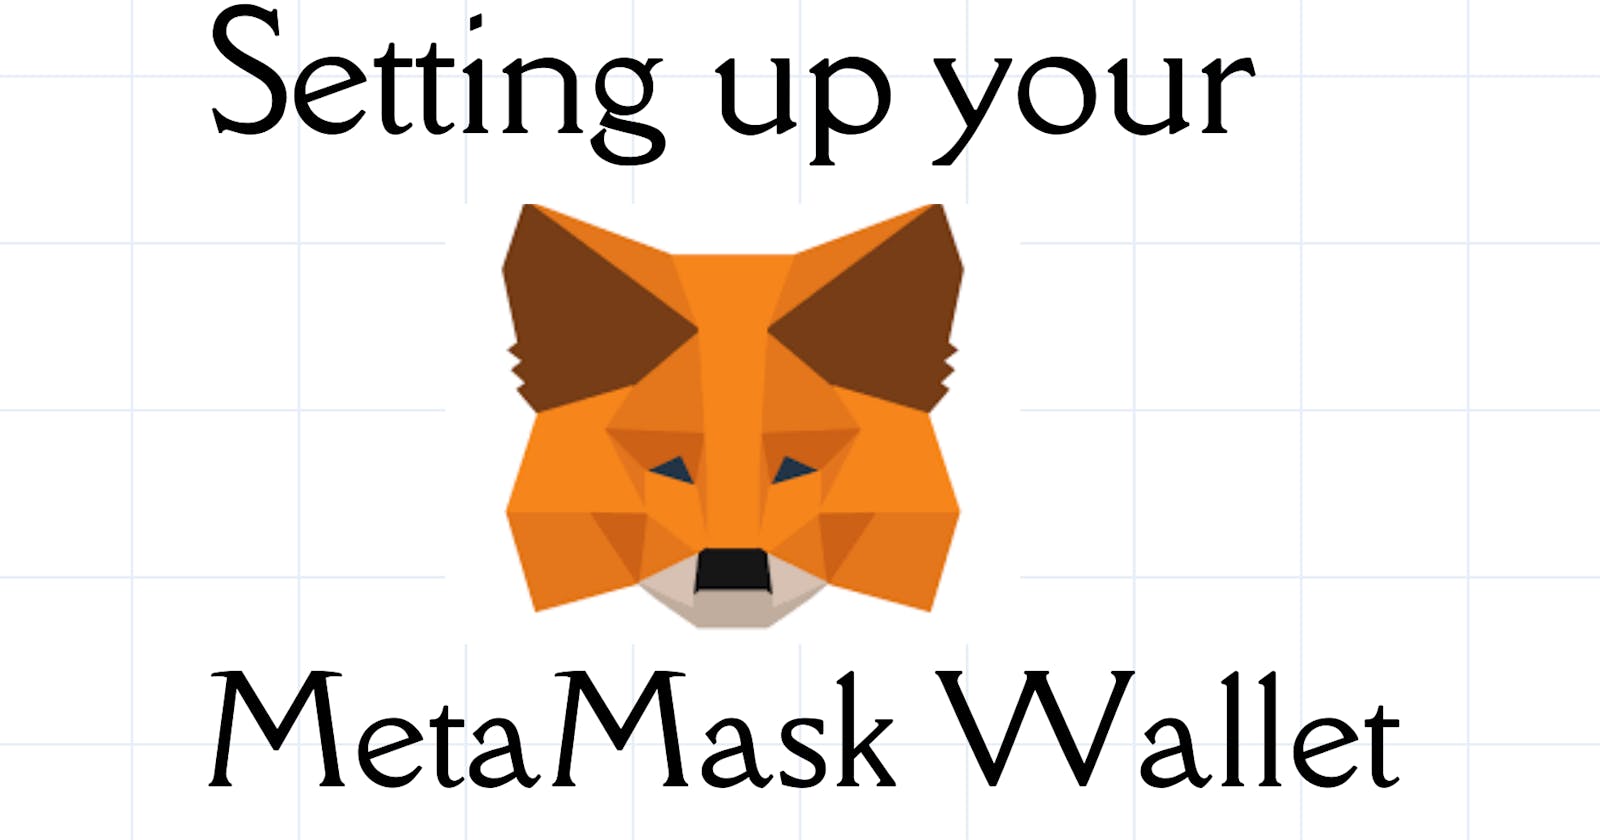 Setting up your MetaMask wallet